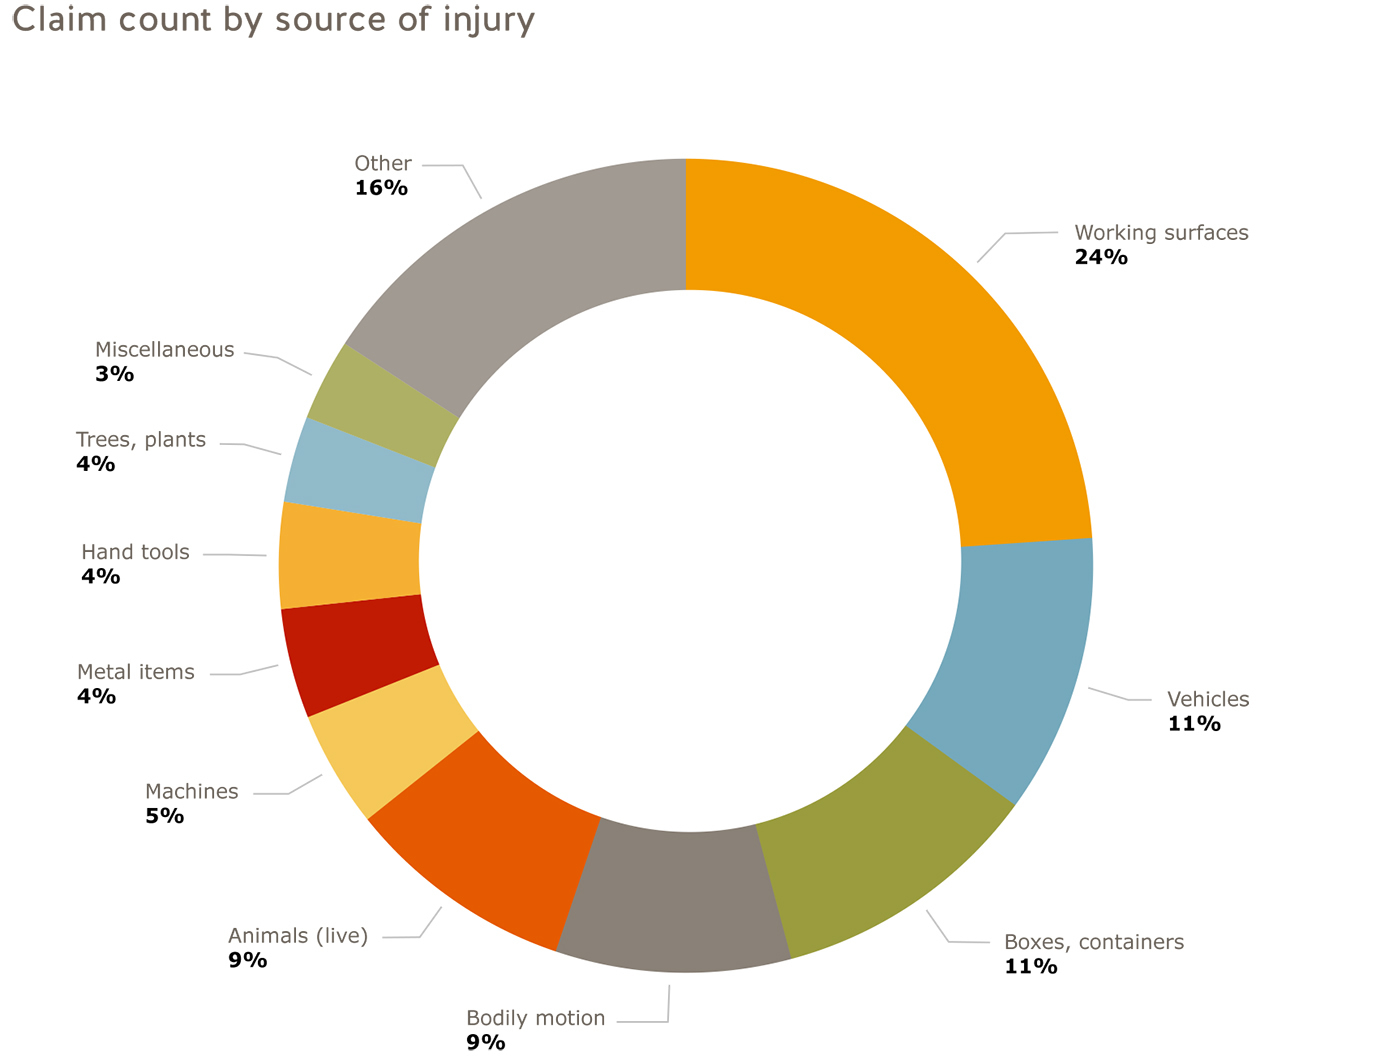 Agriculture claim count by source of injury for 2018. Working surfaces=24%; vehicles=11%; boxes, containers=11%; bodily  motion=9%; animals (live)=9%; machines=5%; metal items=4%; hand tools=4%; trees, plants=4%; miscellaneous=3%; other=16%.